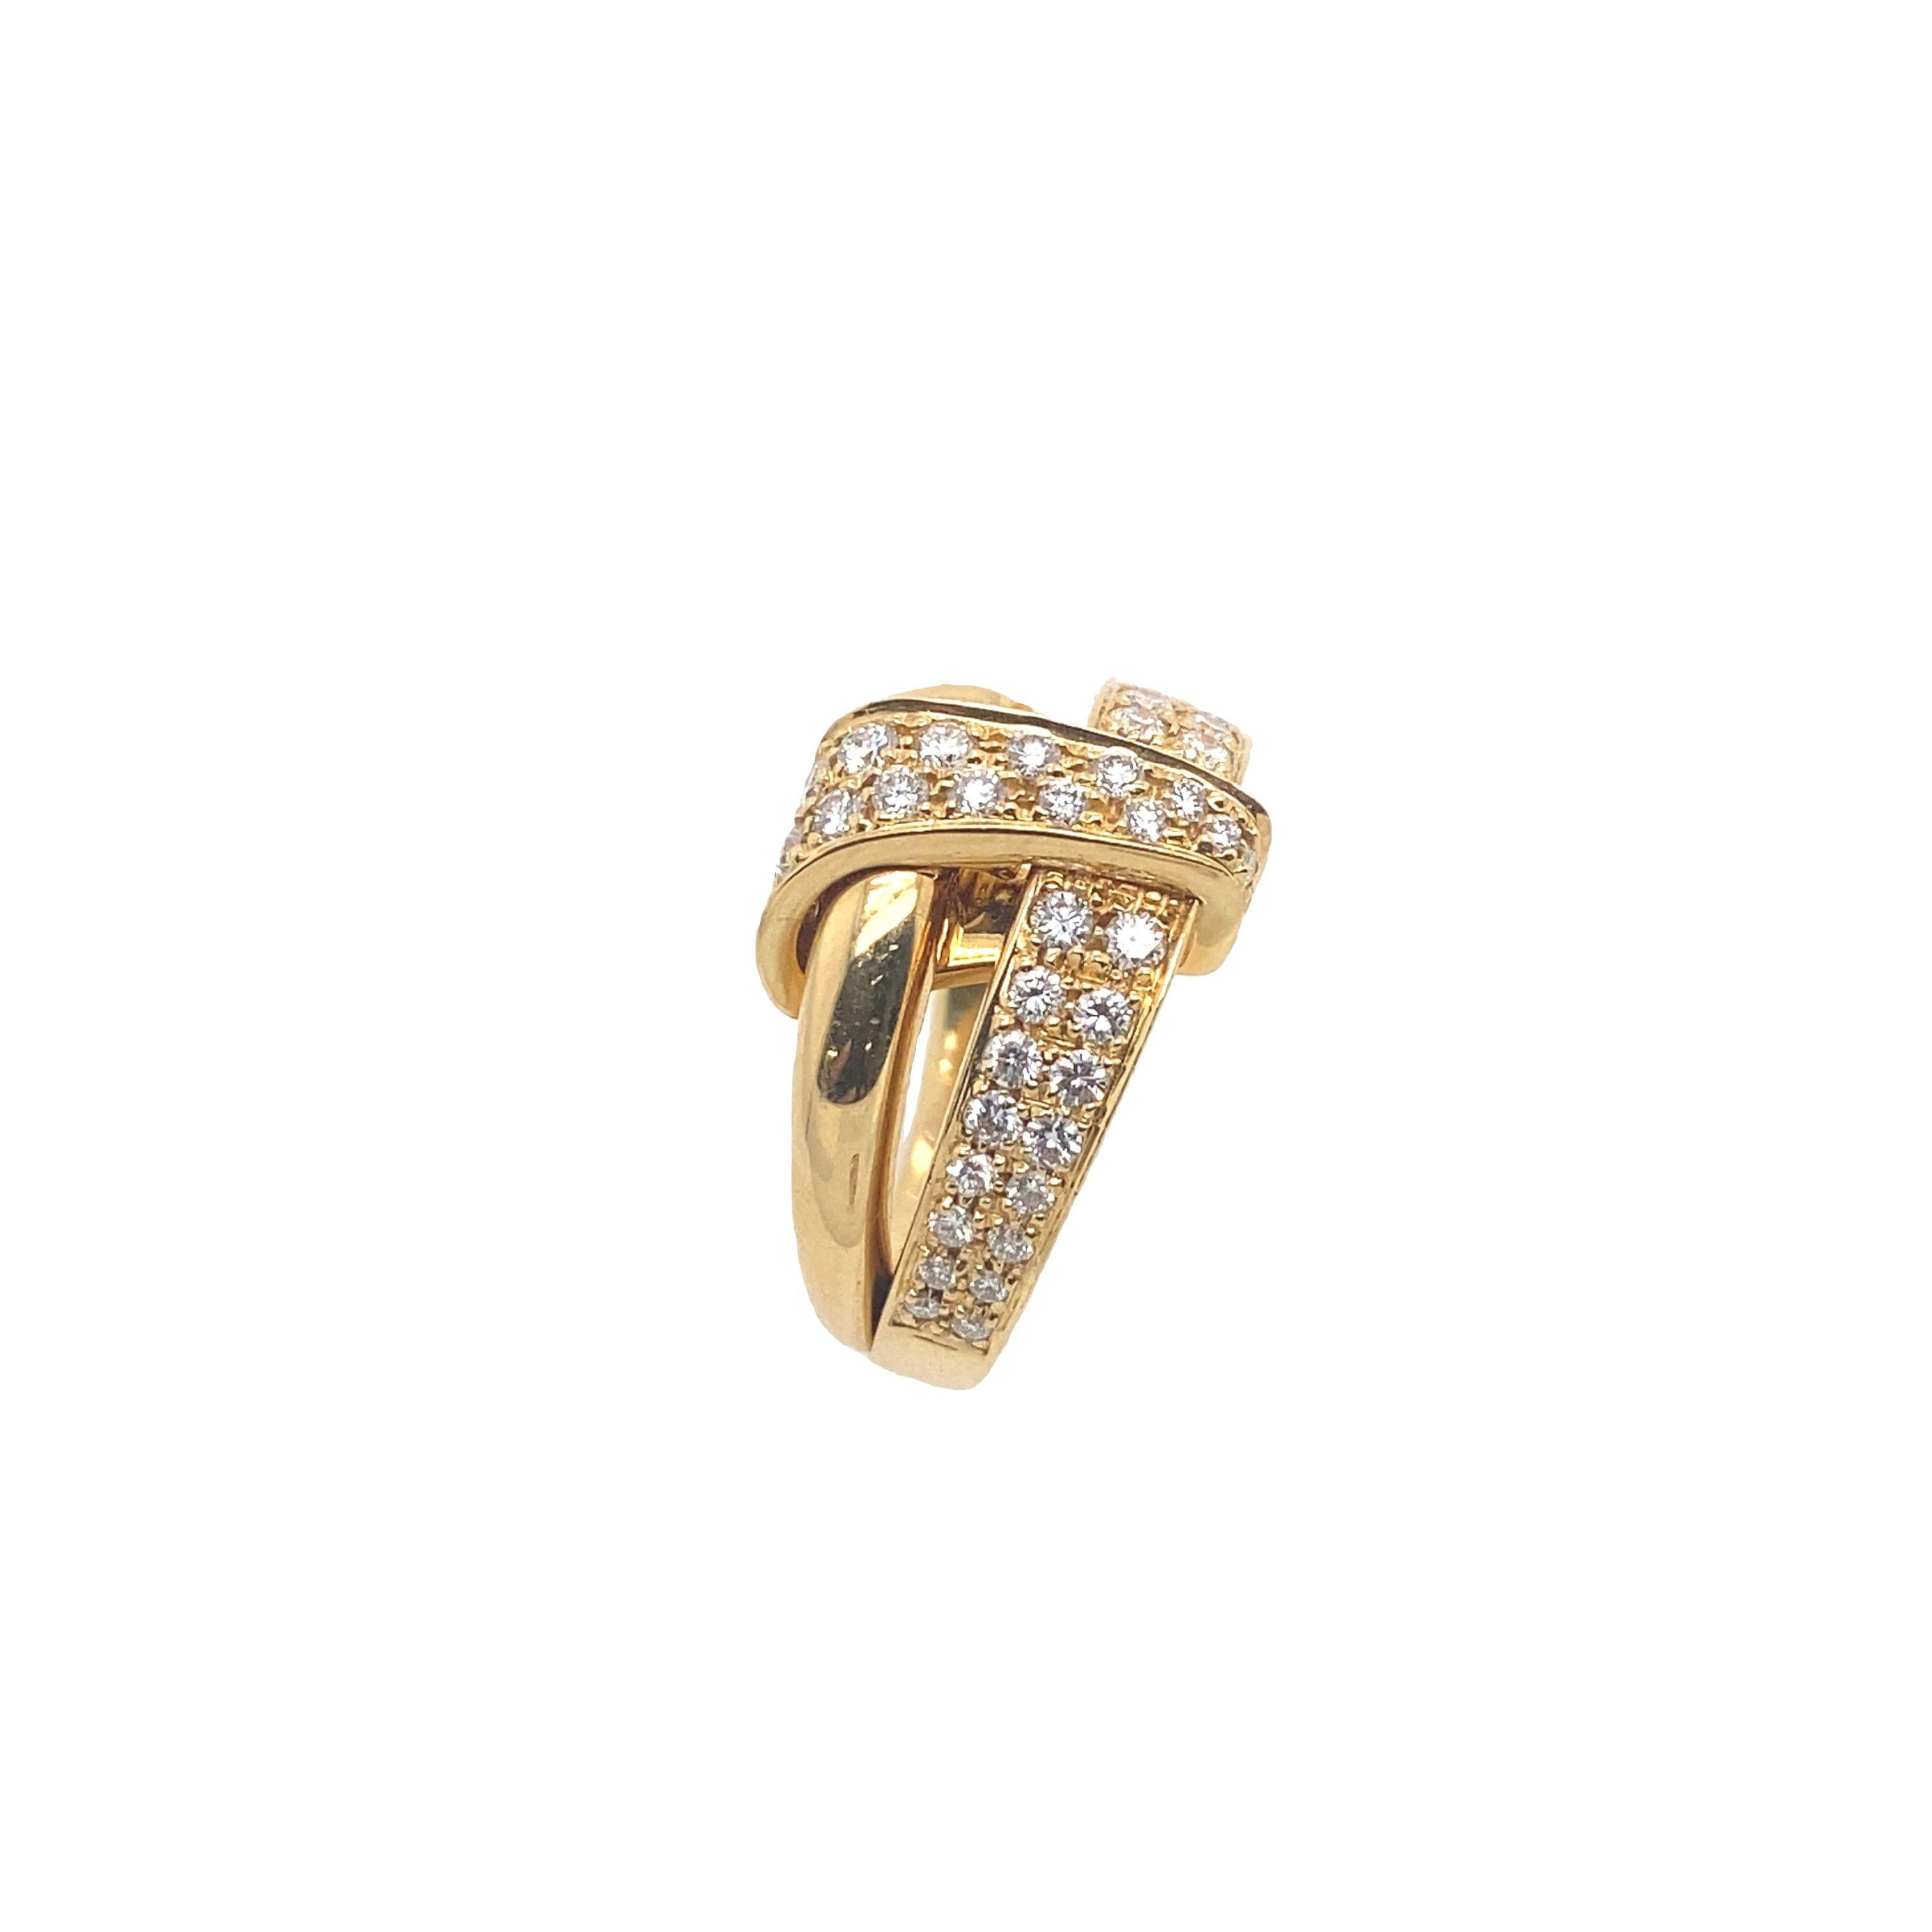  This Asprey Diamond ring is stunning and would make a wonderful gift for someone special.  Covered in 0.65ct of natural round brilliant cut diamonds and crafted from 18ct yellow gold,  this ring will be a treasured possession for many years to